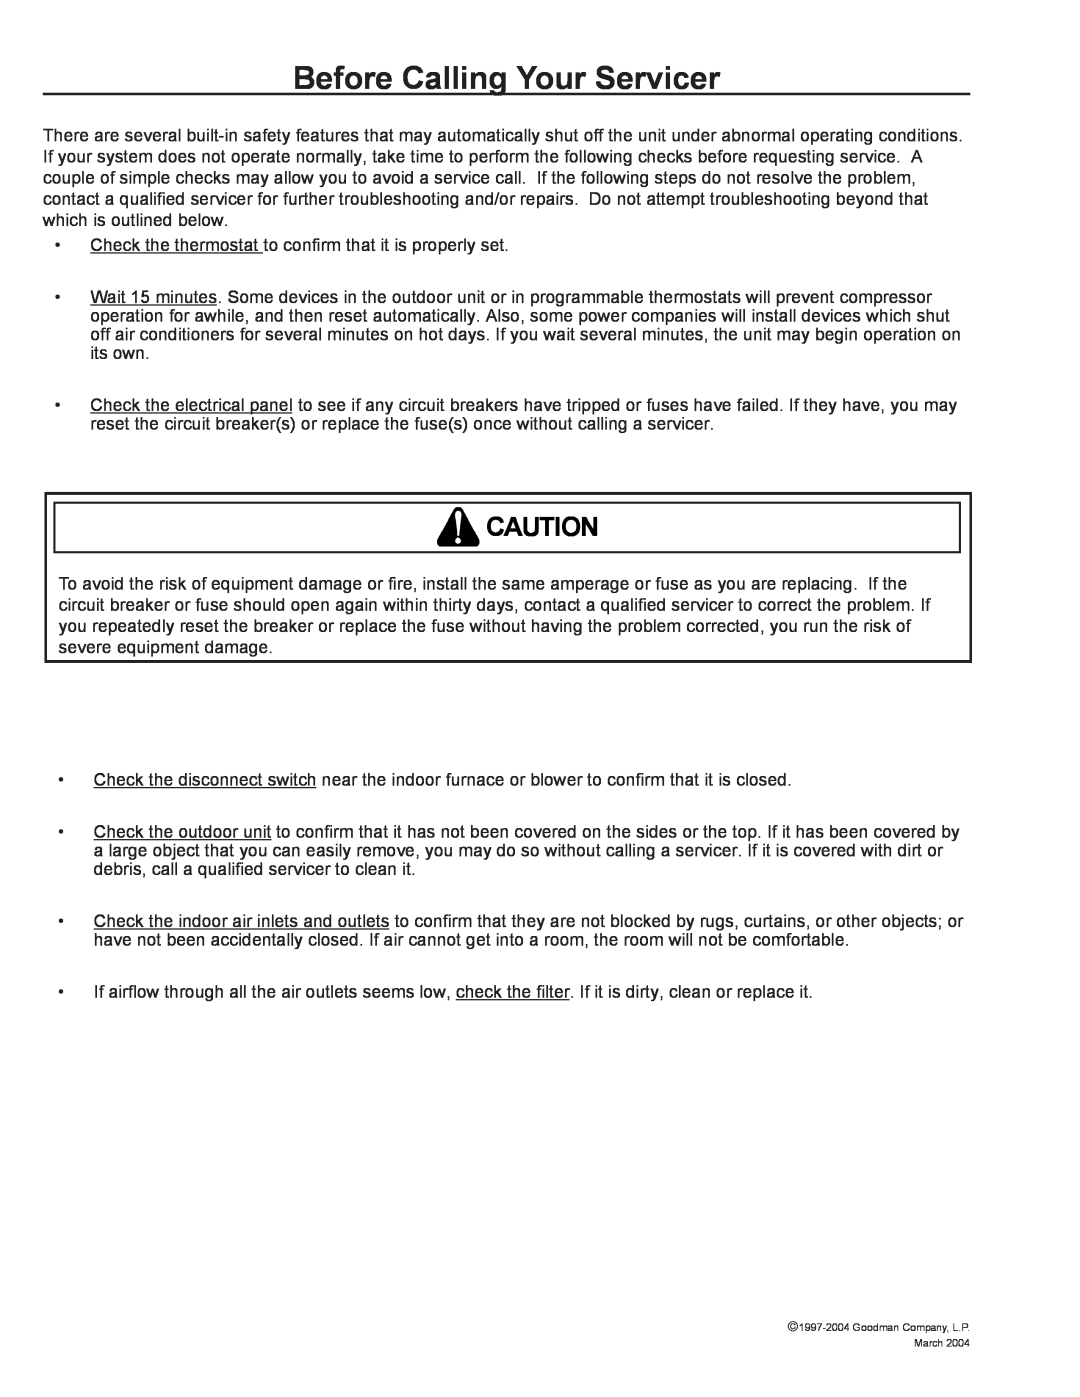 Amana REMOTE CONDENSING UNIT user manual Before Calling Your Servicer,  1997-2004Goodman Company, L.P March 